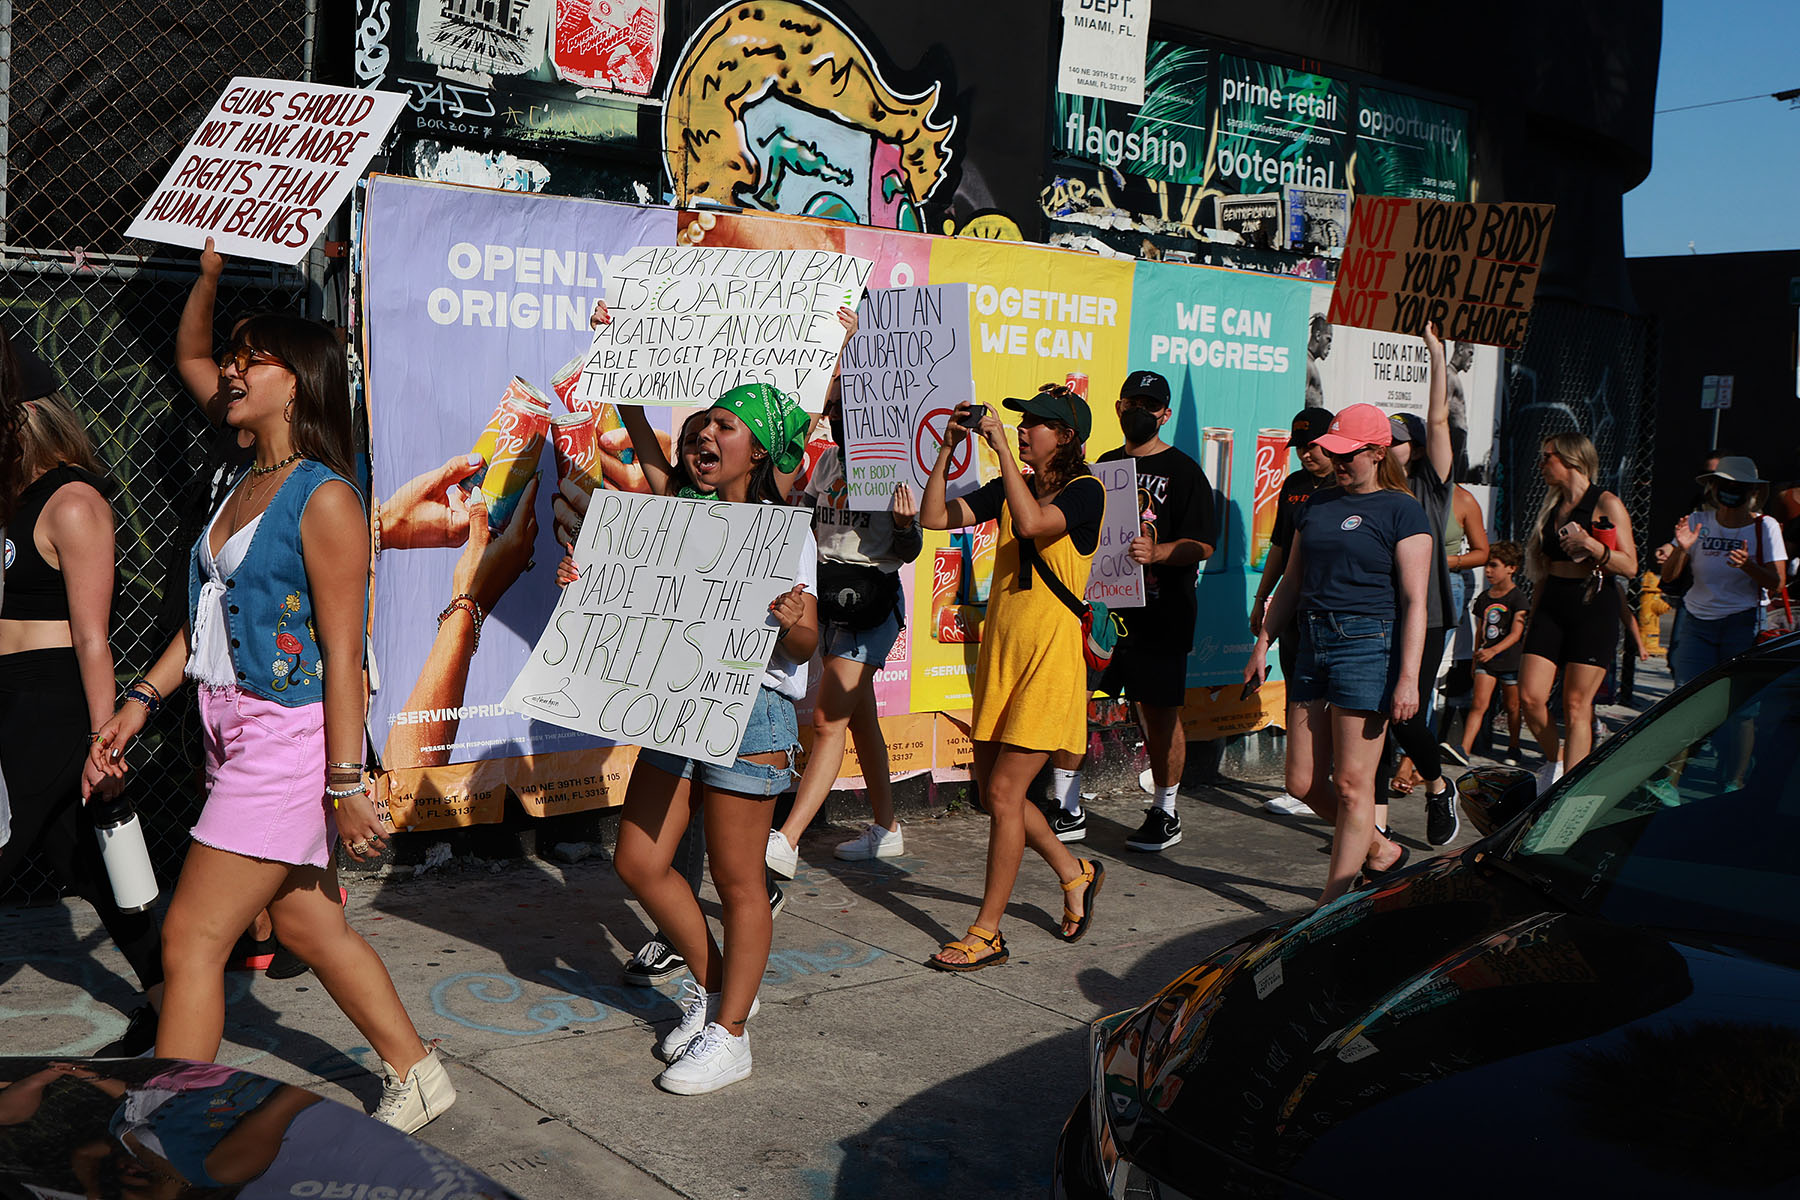 People march together to protest the Supreme Court's decision in the Dobbs v Jackson Women's Health case on June 24, 2022 in Miami, Florida.